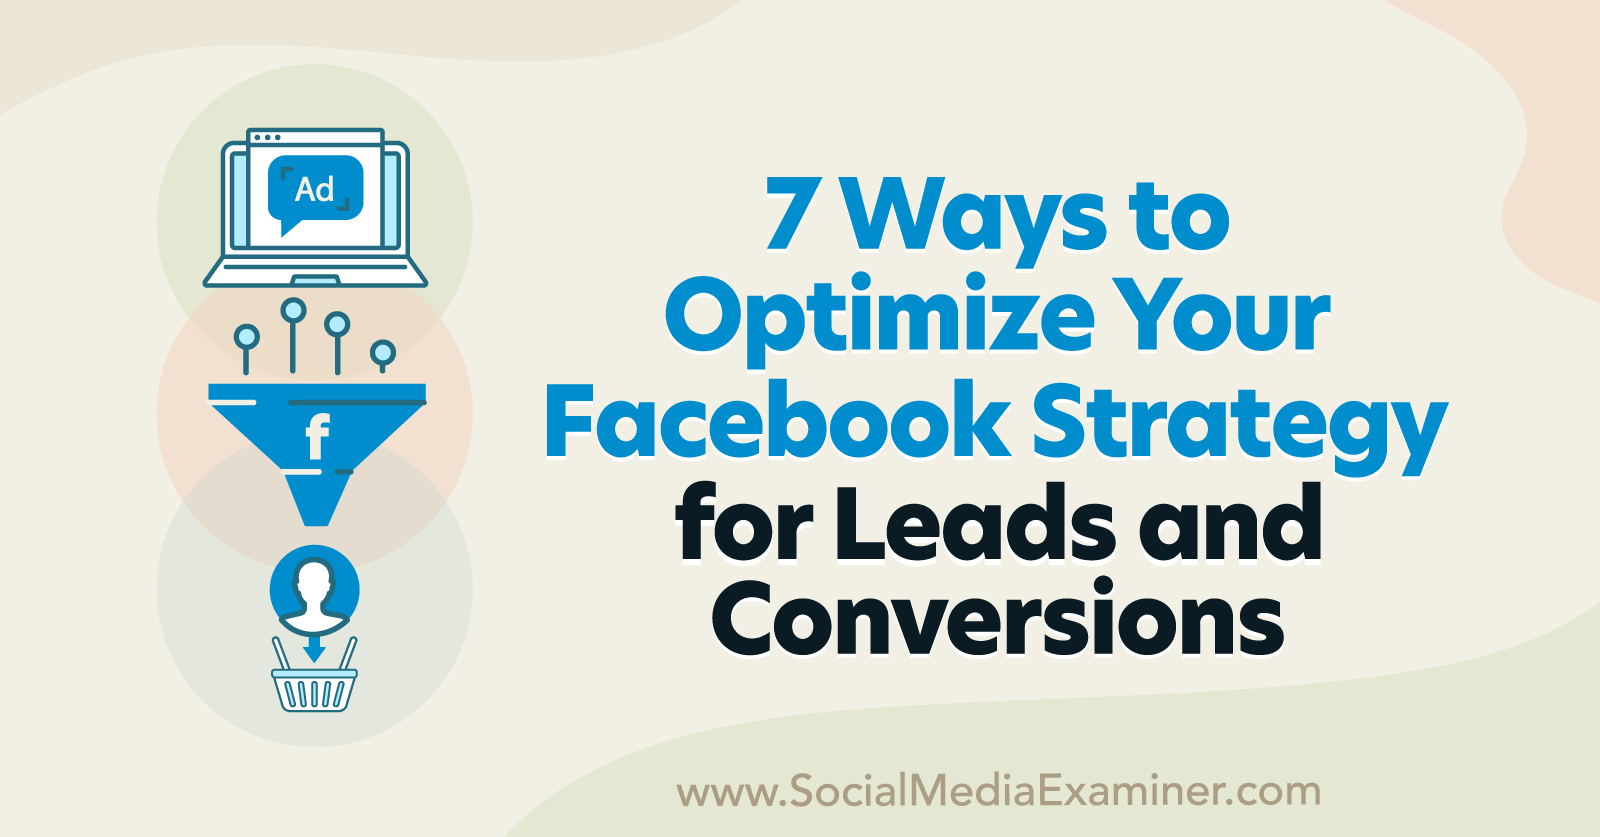 7 Ways to Optimize Your Facebook Strategy for Leads and Conversions by Anna Sonnenberg